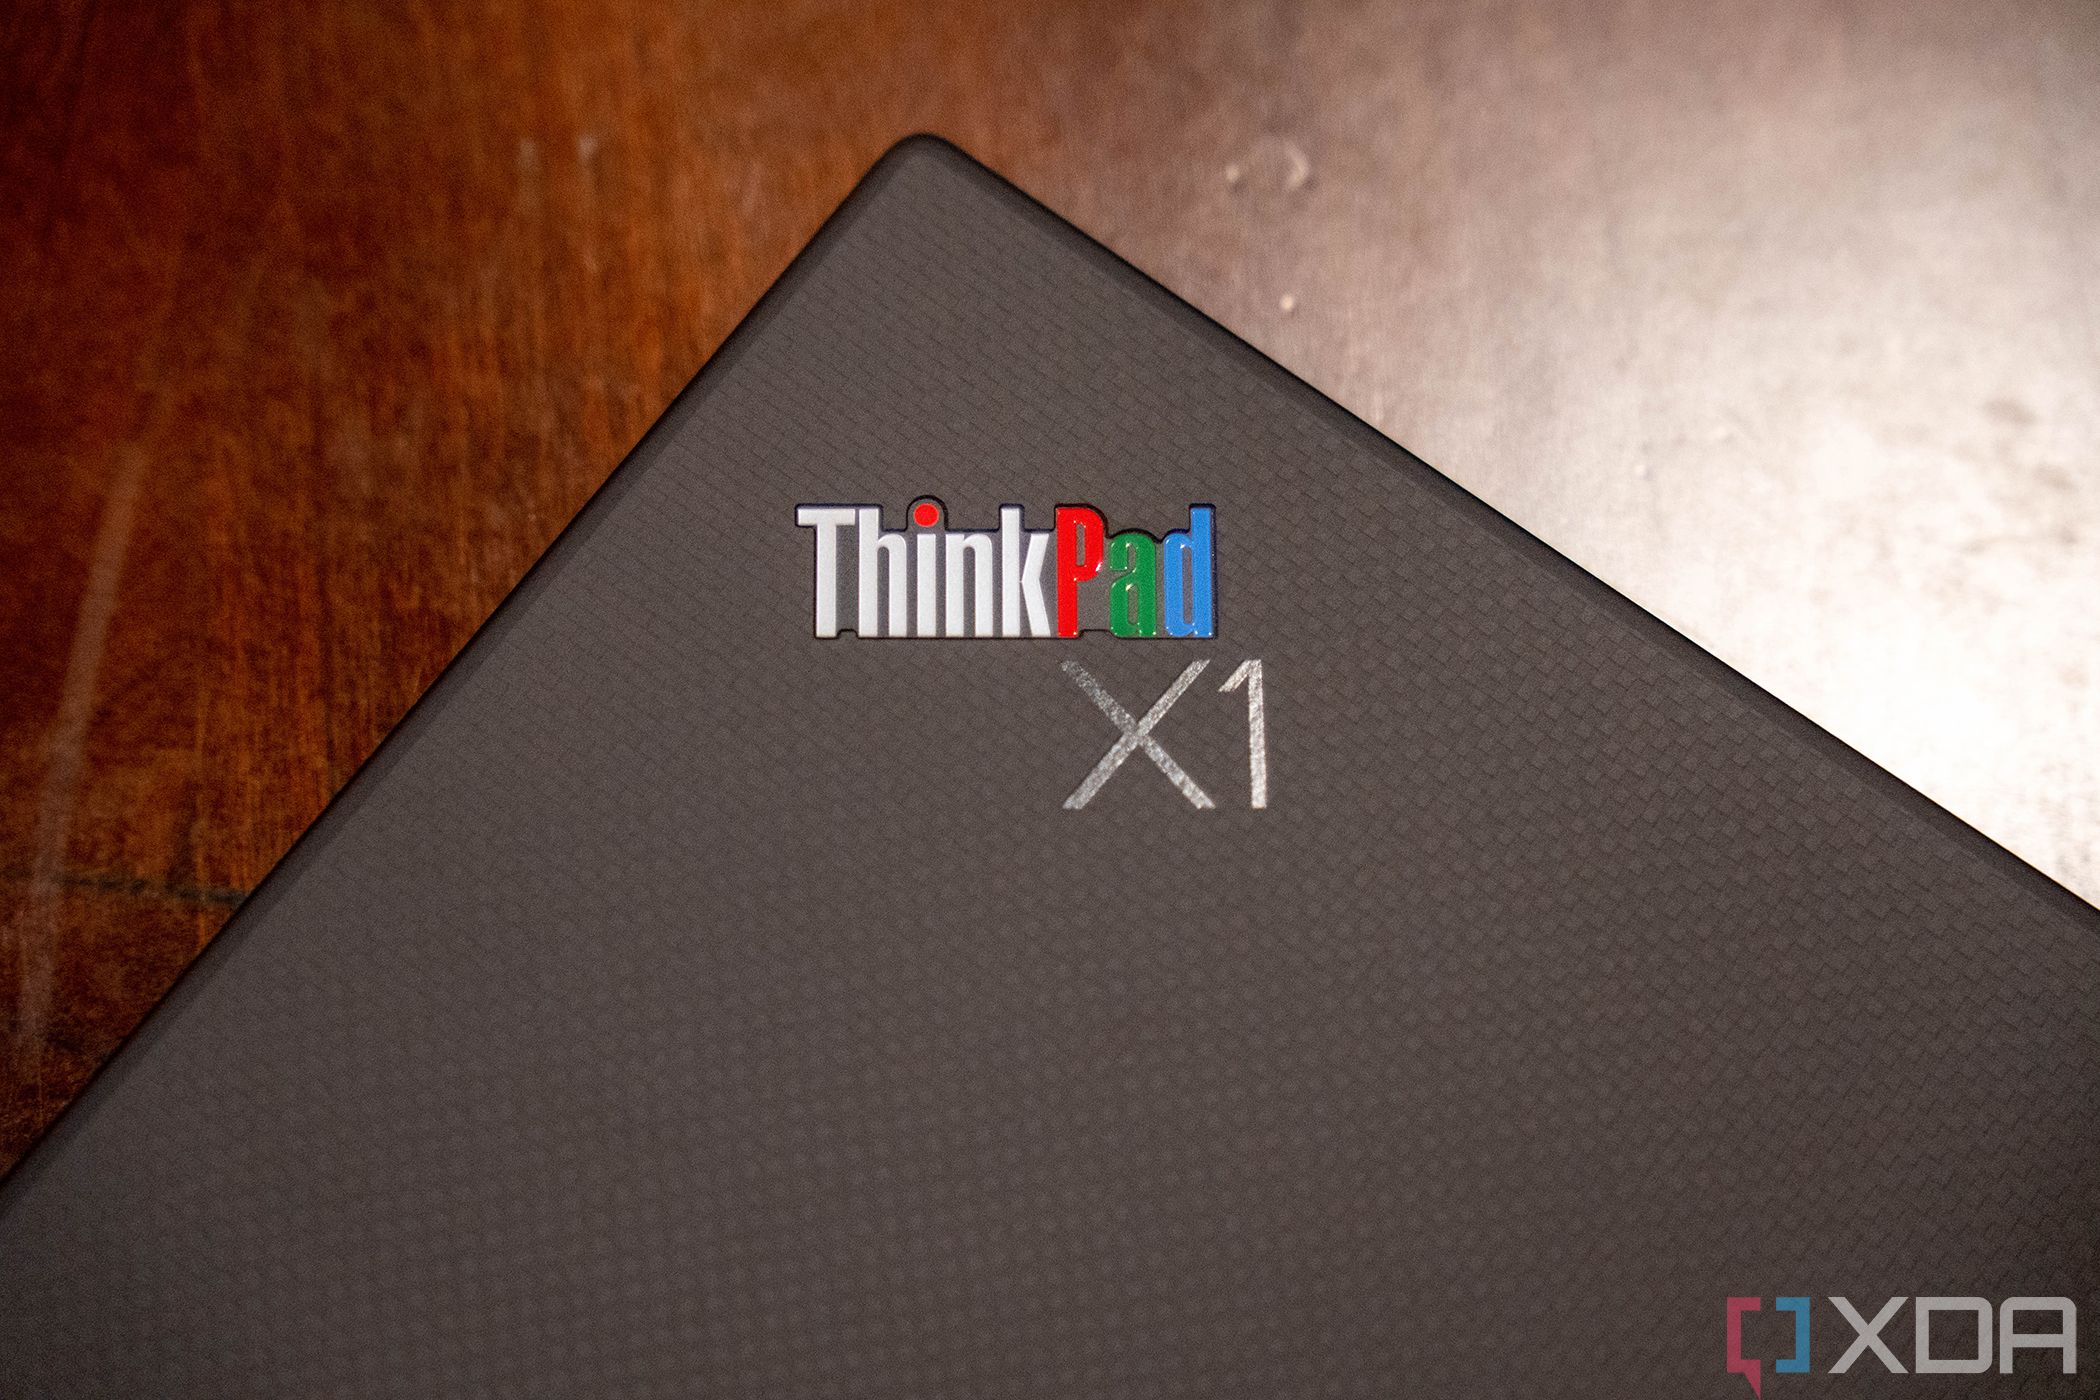 Does The Lenovo Thinkpad X1 Carbon Gen 11 Have 5G?